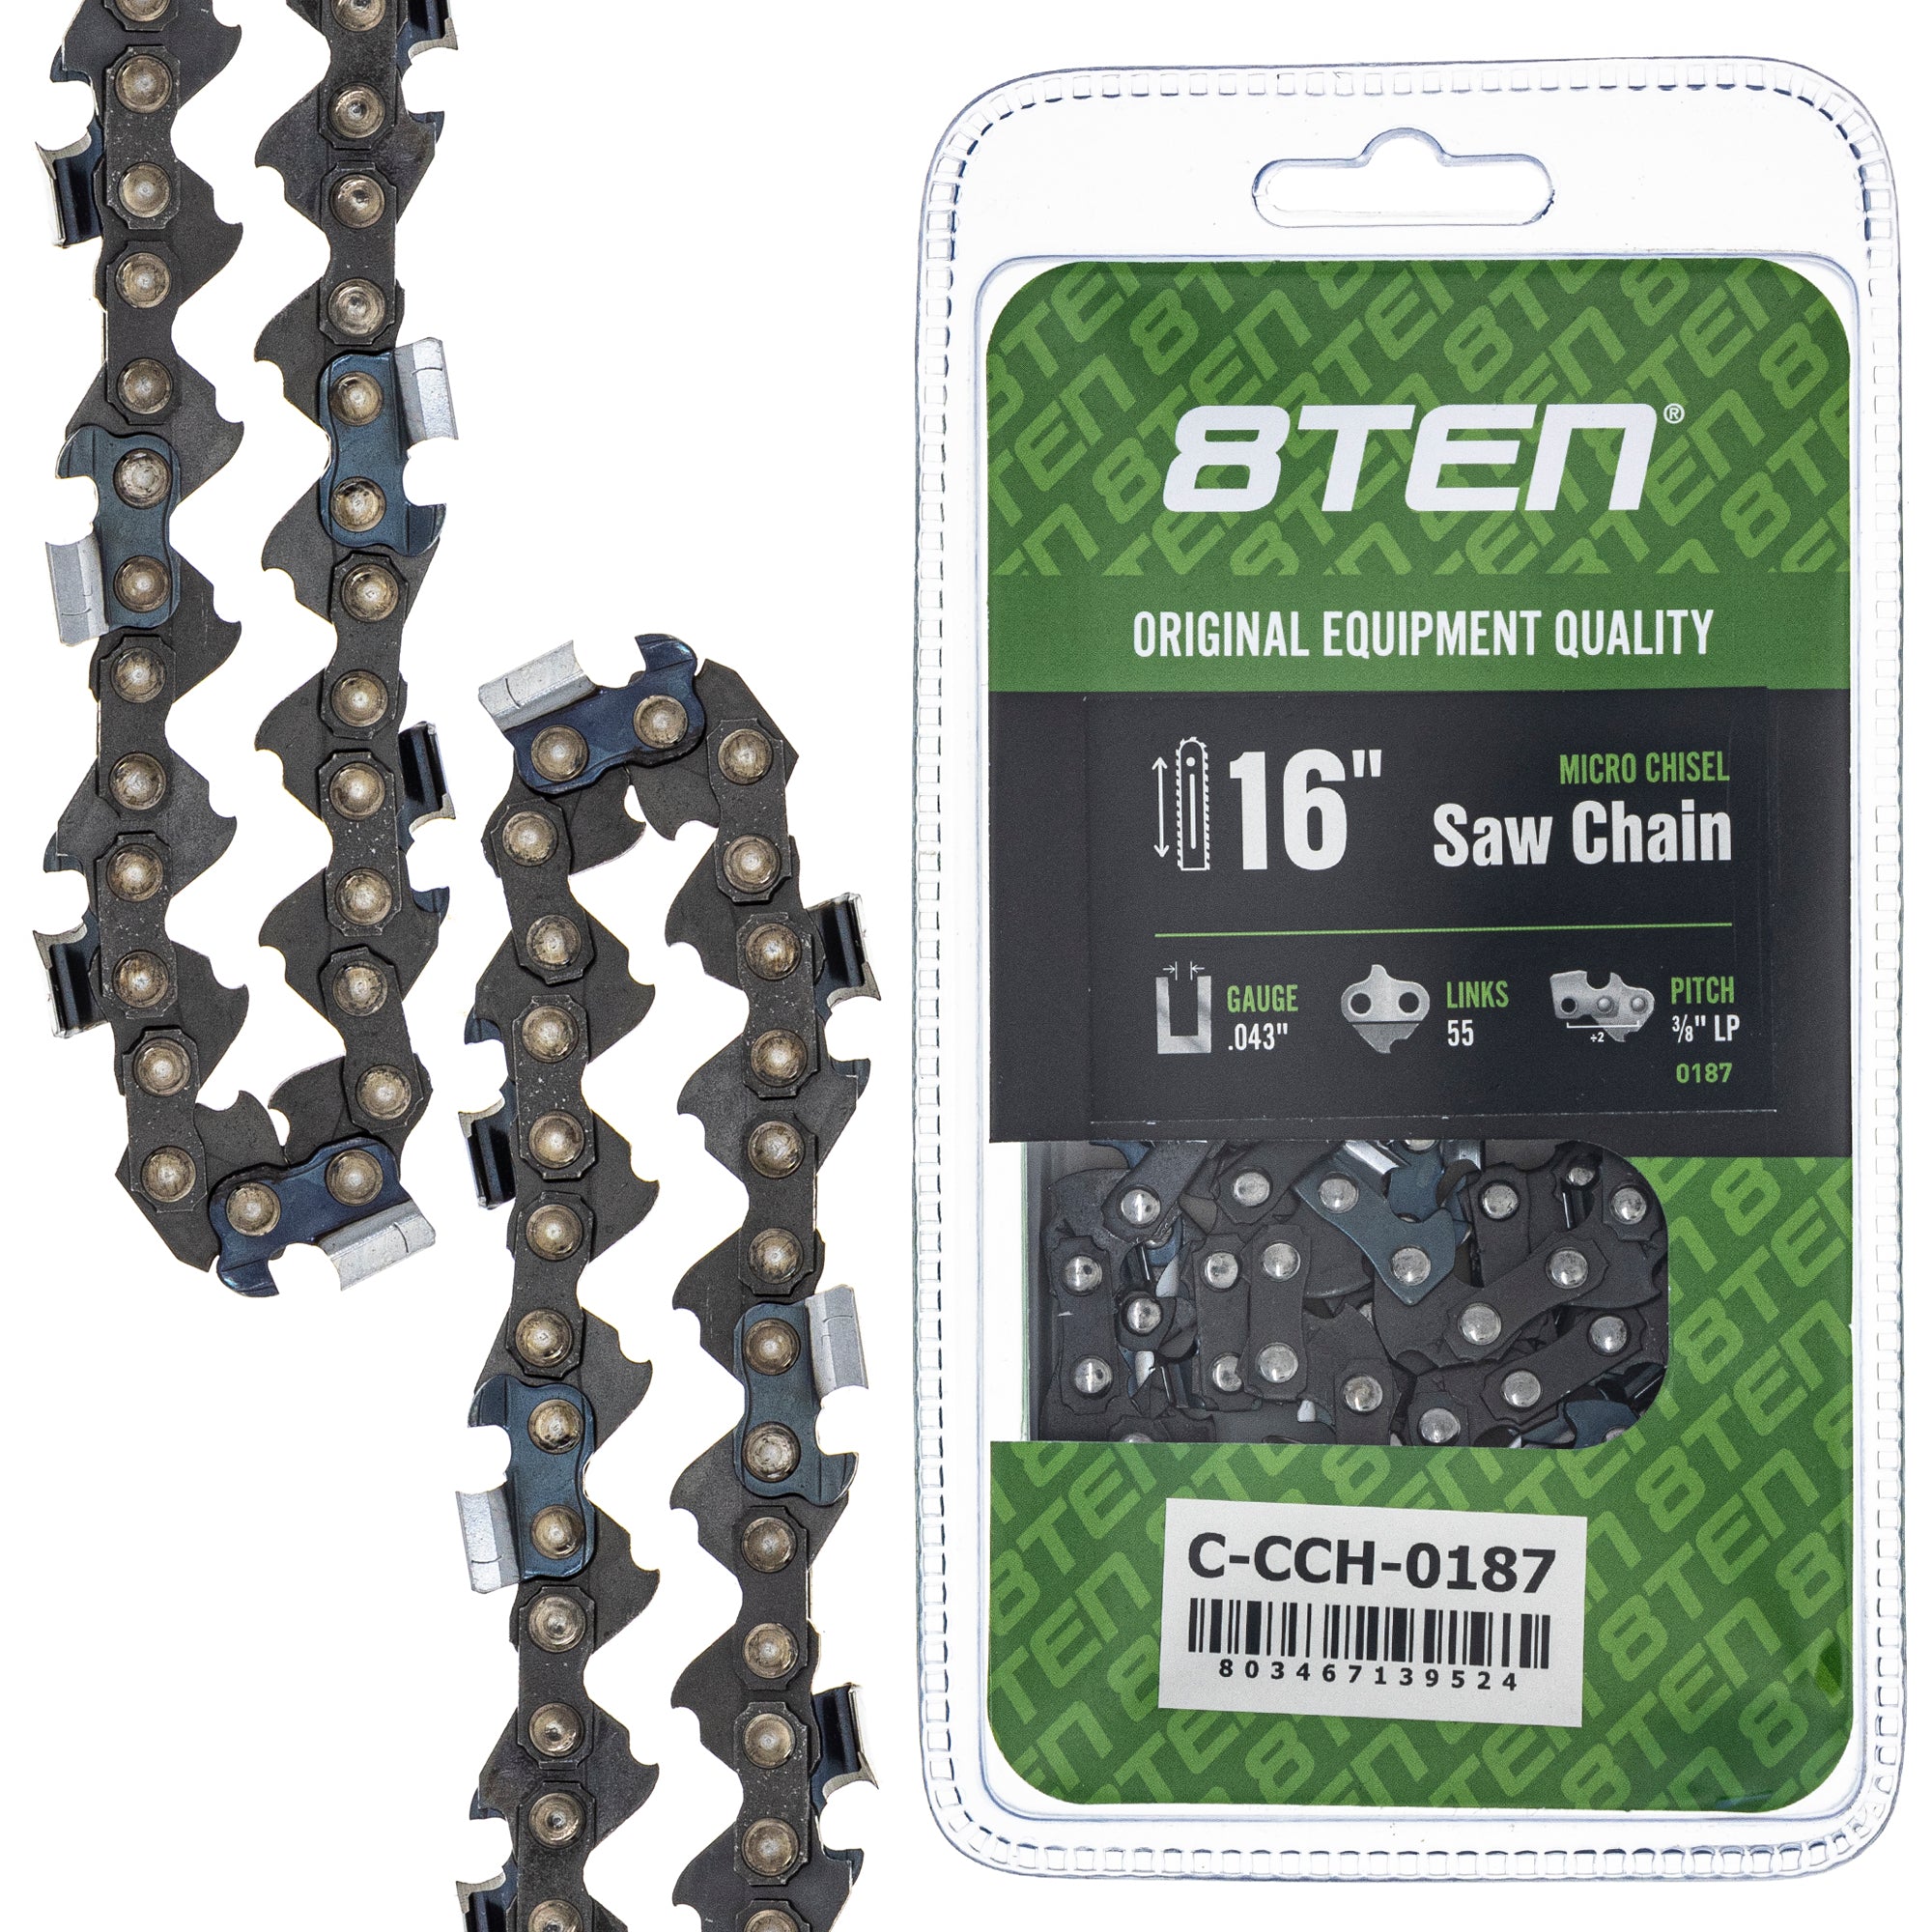 Chainsaw Chain 16 Inch .043 3/8 LP 55DL for zOTHER Stens Oregon MSE MS HT E 8TEN 810-CCC2309H